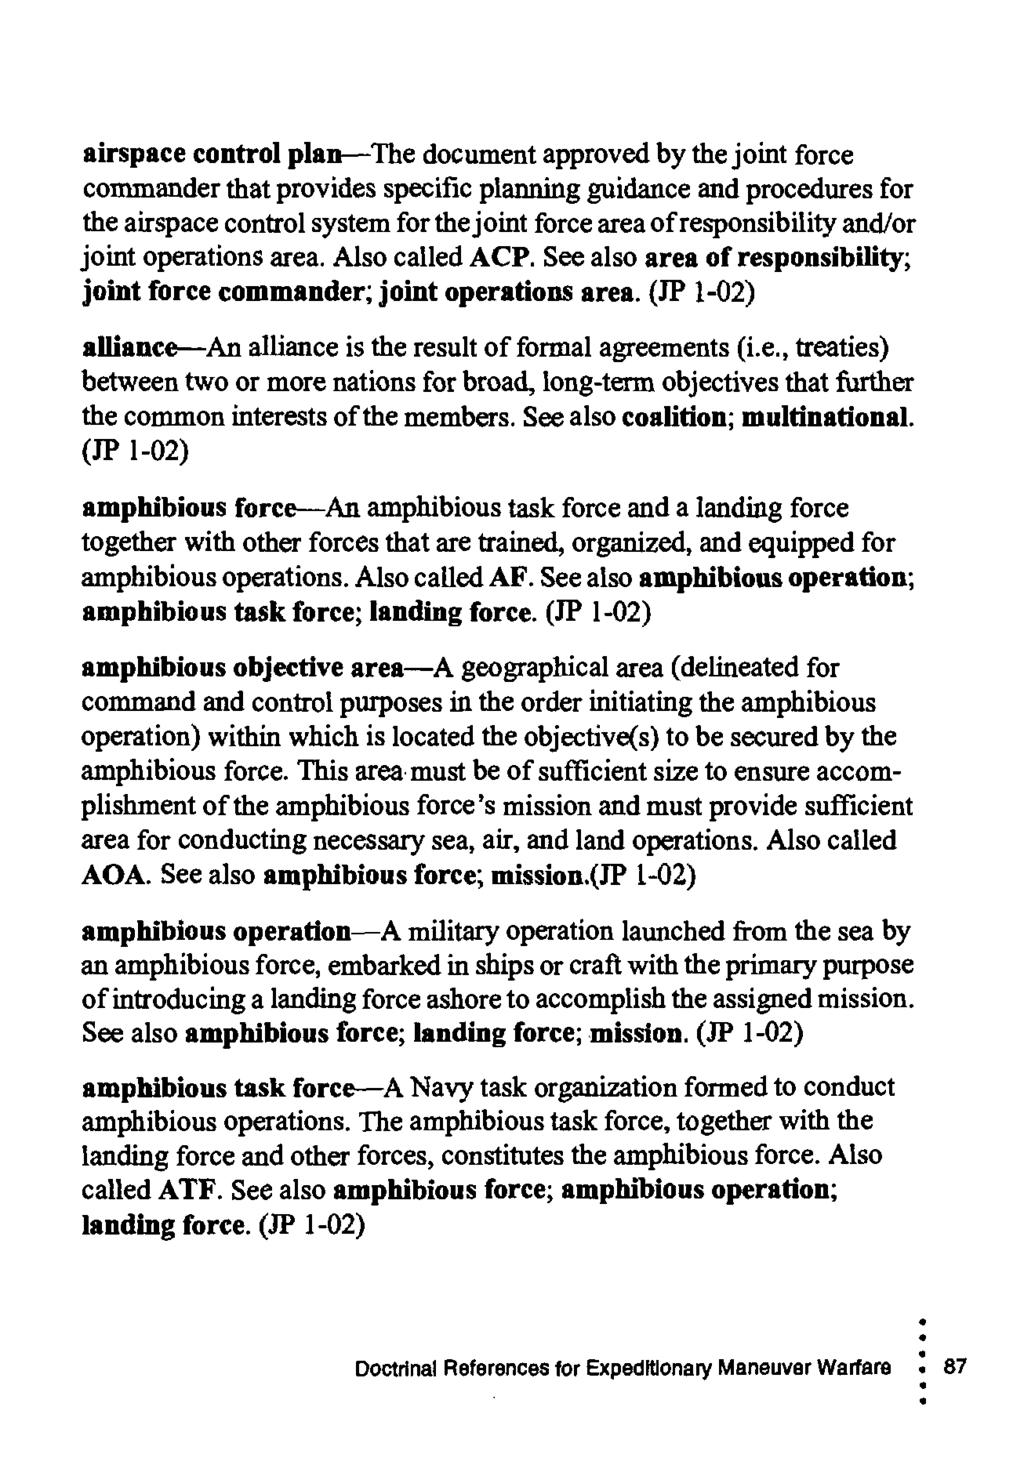 airspace control plan The document approved by the jomt force commander that provides specific planning guidance and procedures for the airspace control system for the joint force area of